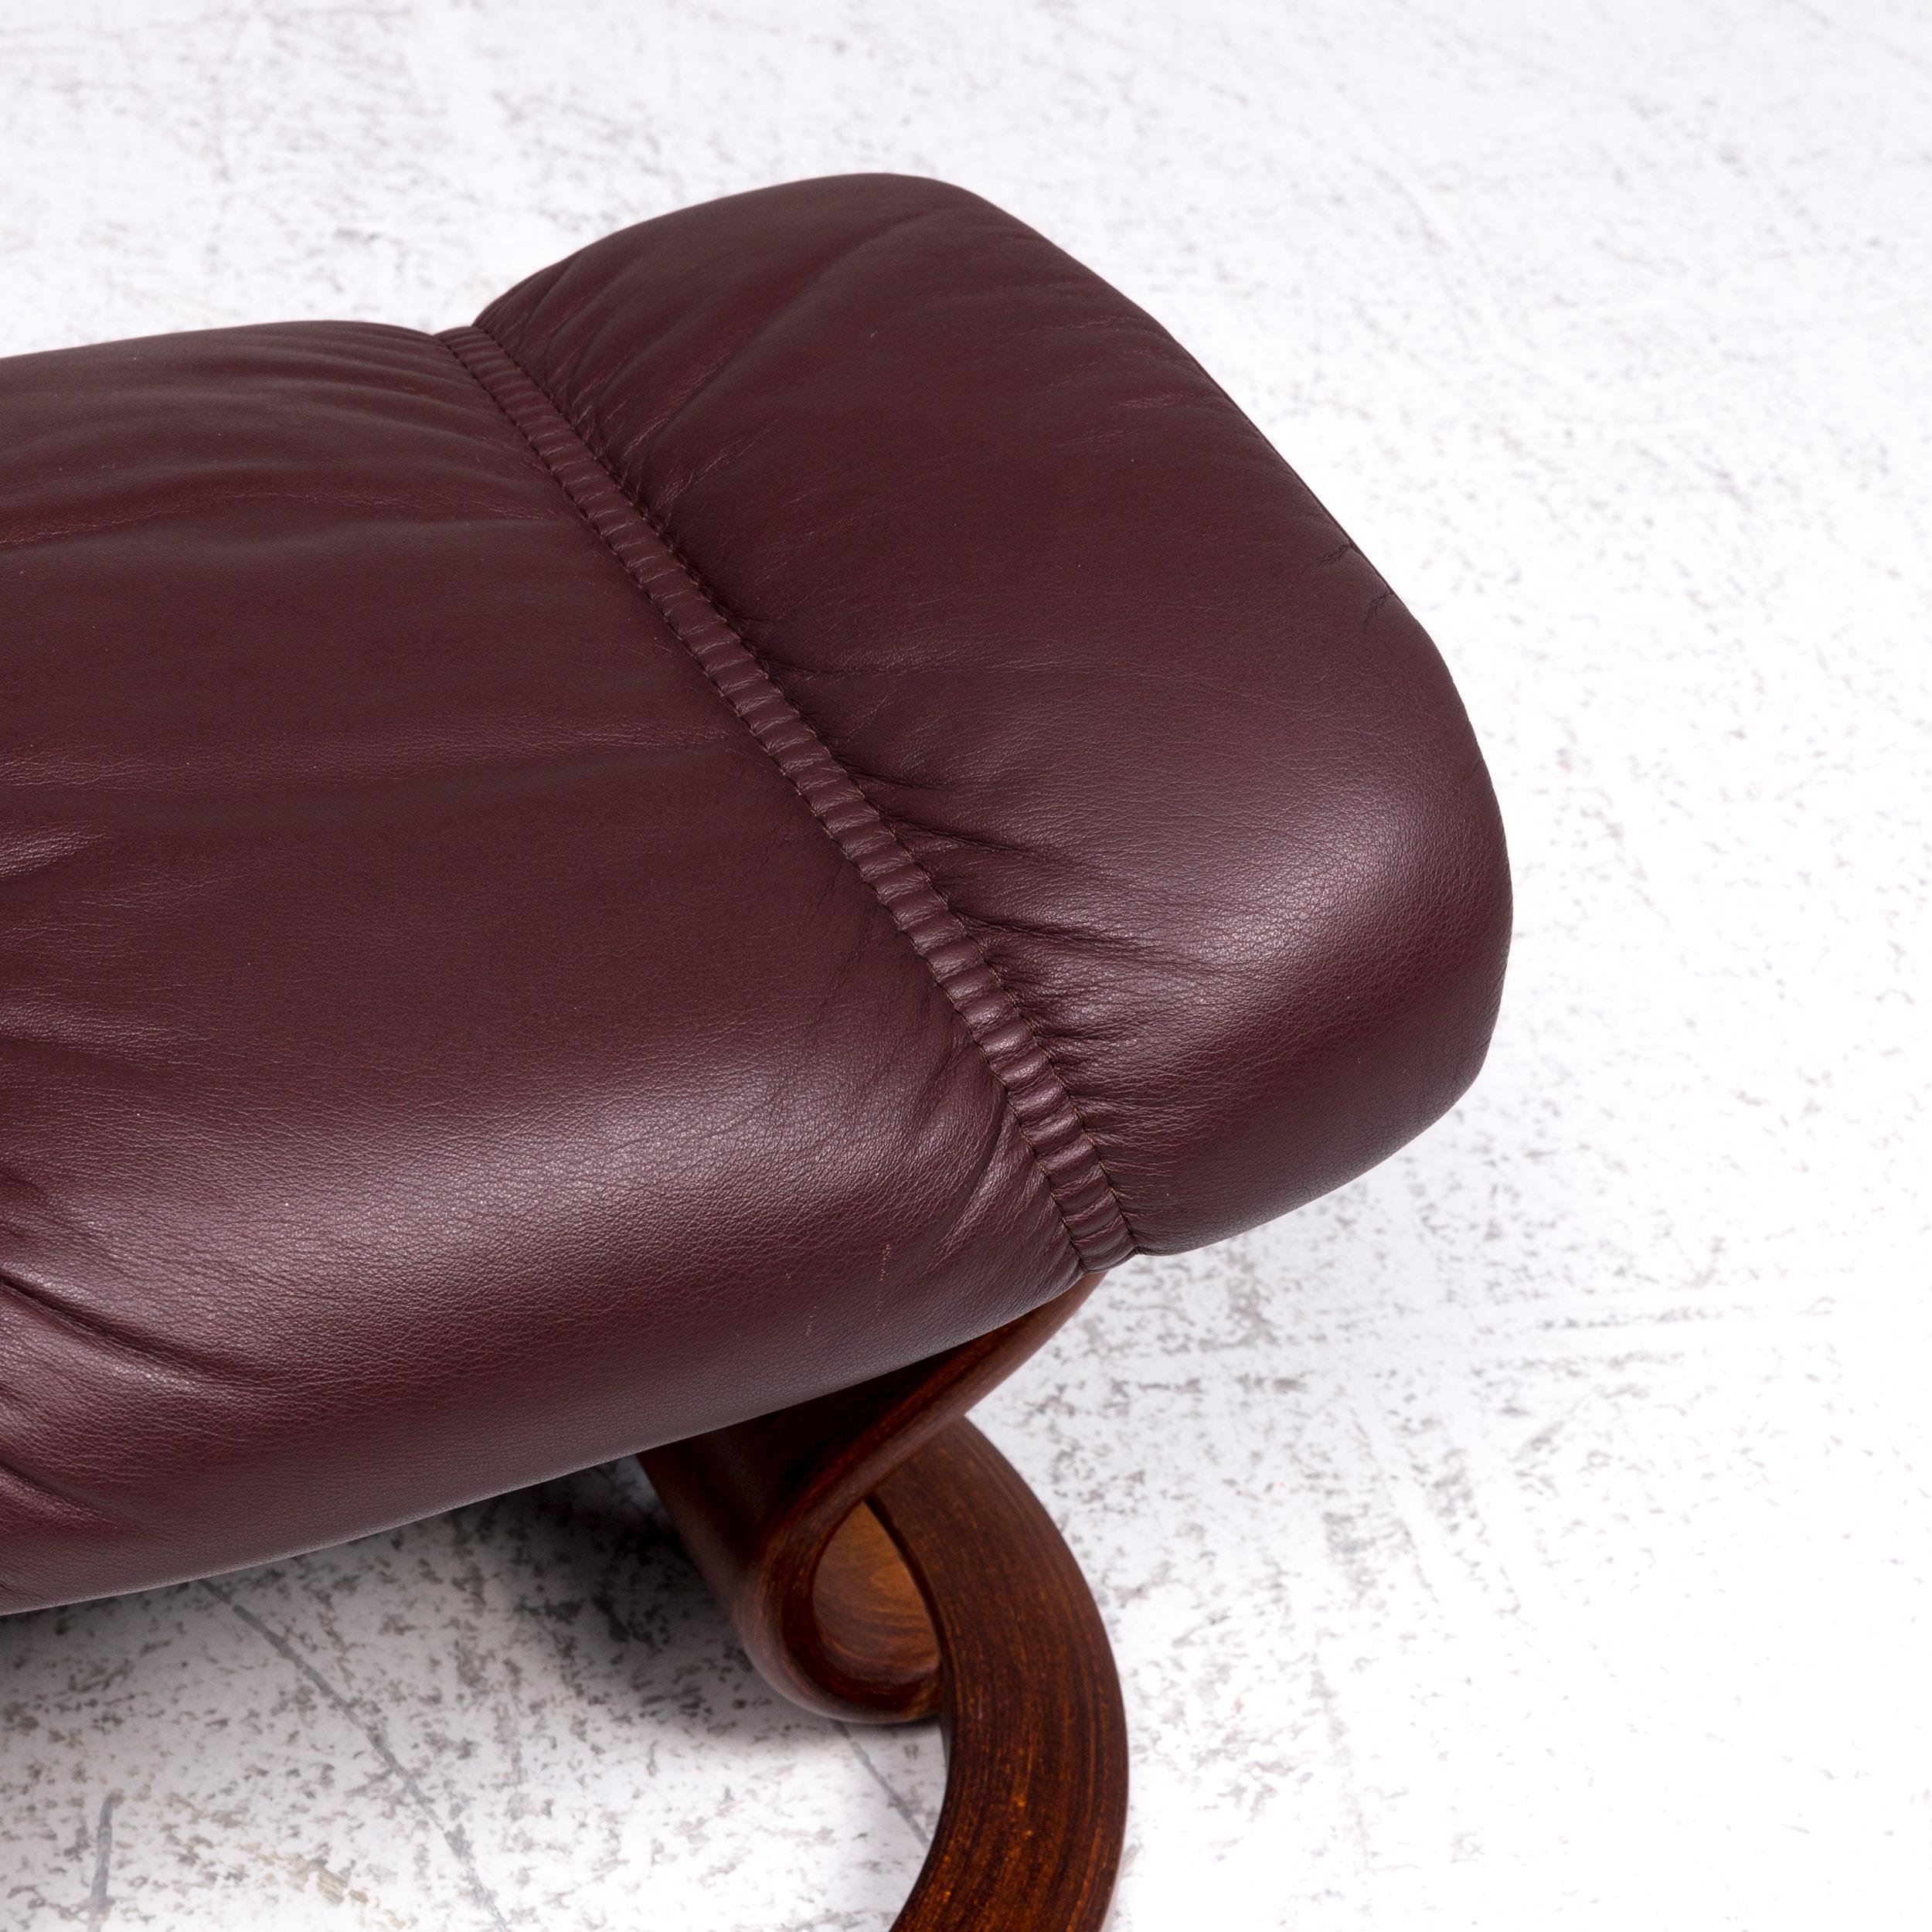 Stressless Consul Leather Armchair Stool Red-Brown Relax Function 13